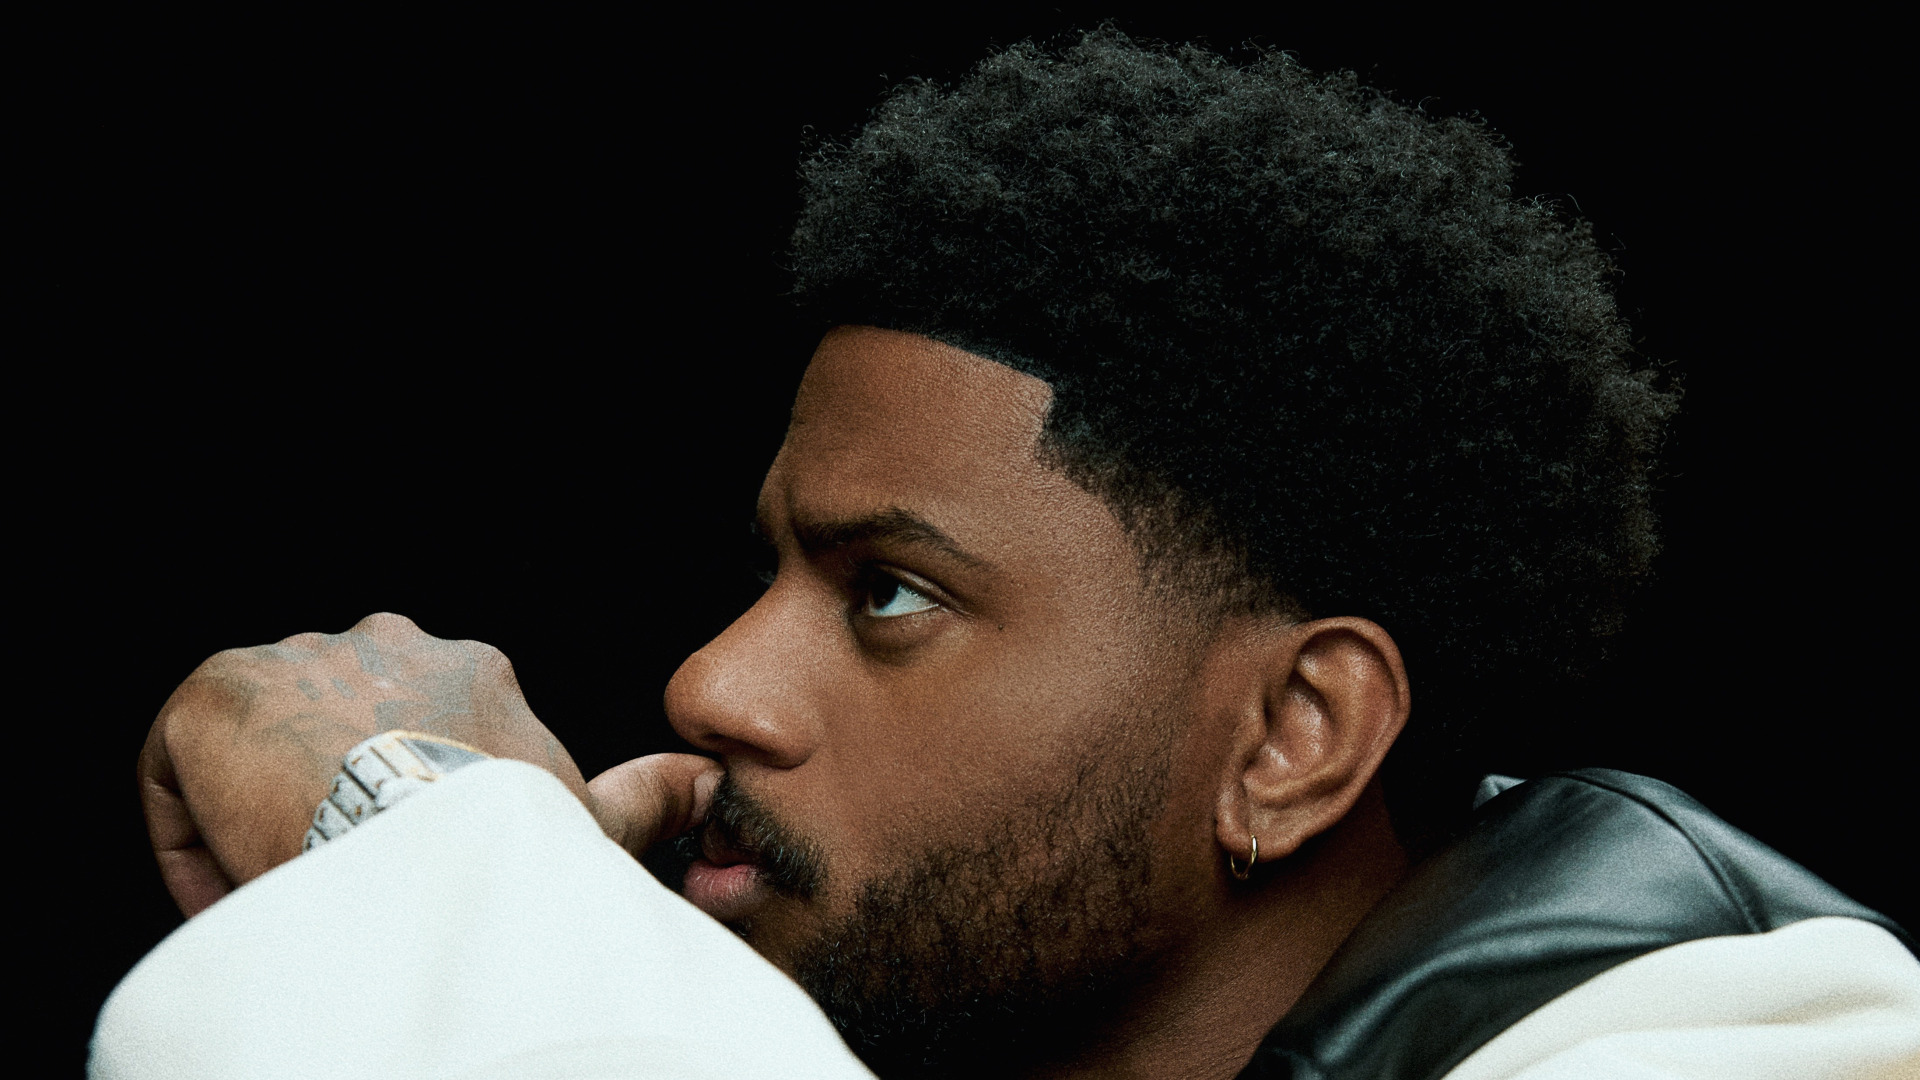 Bryson Tiller is Back, He's Better and Committed to His Self-Evident Evolution #BrysonTiller